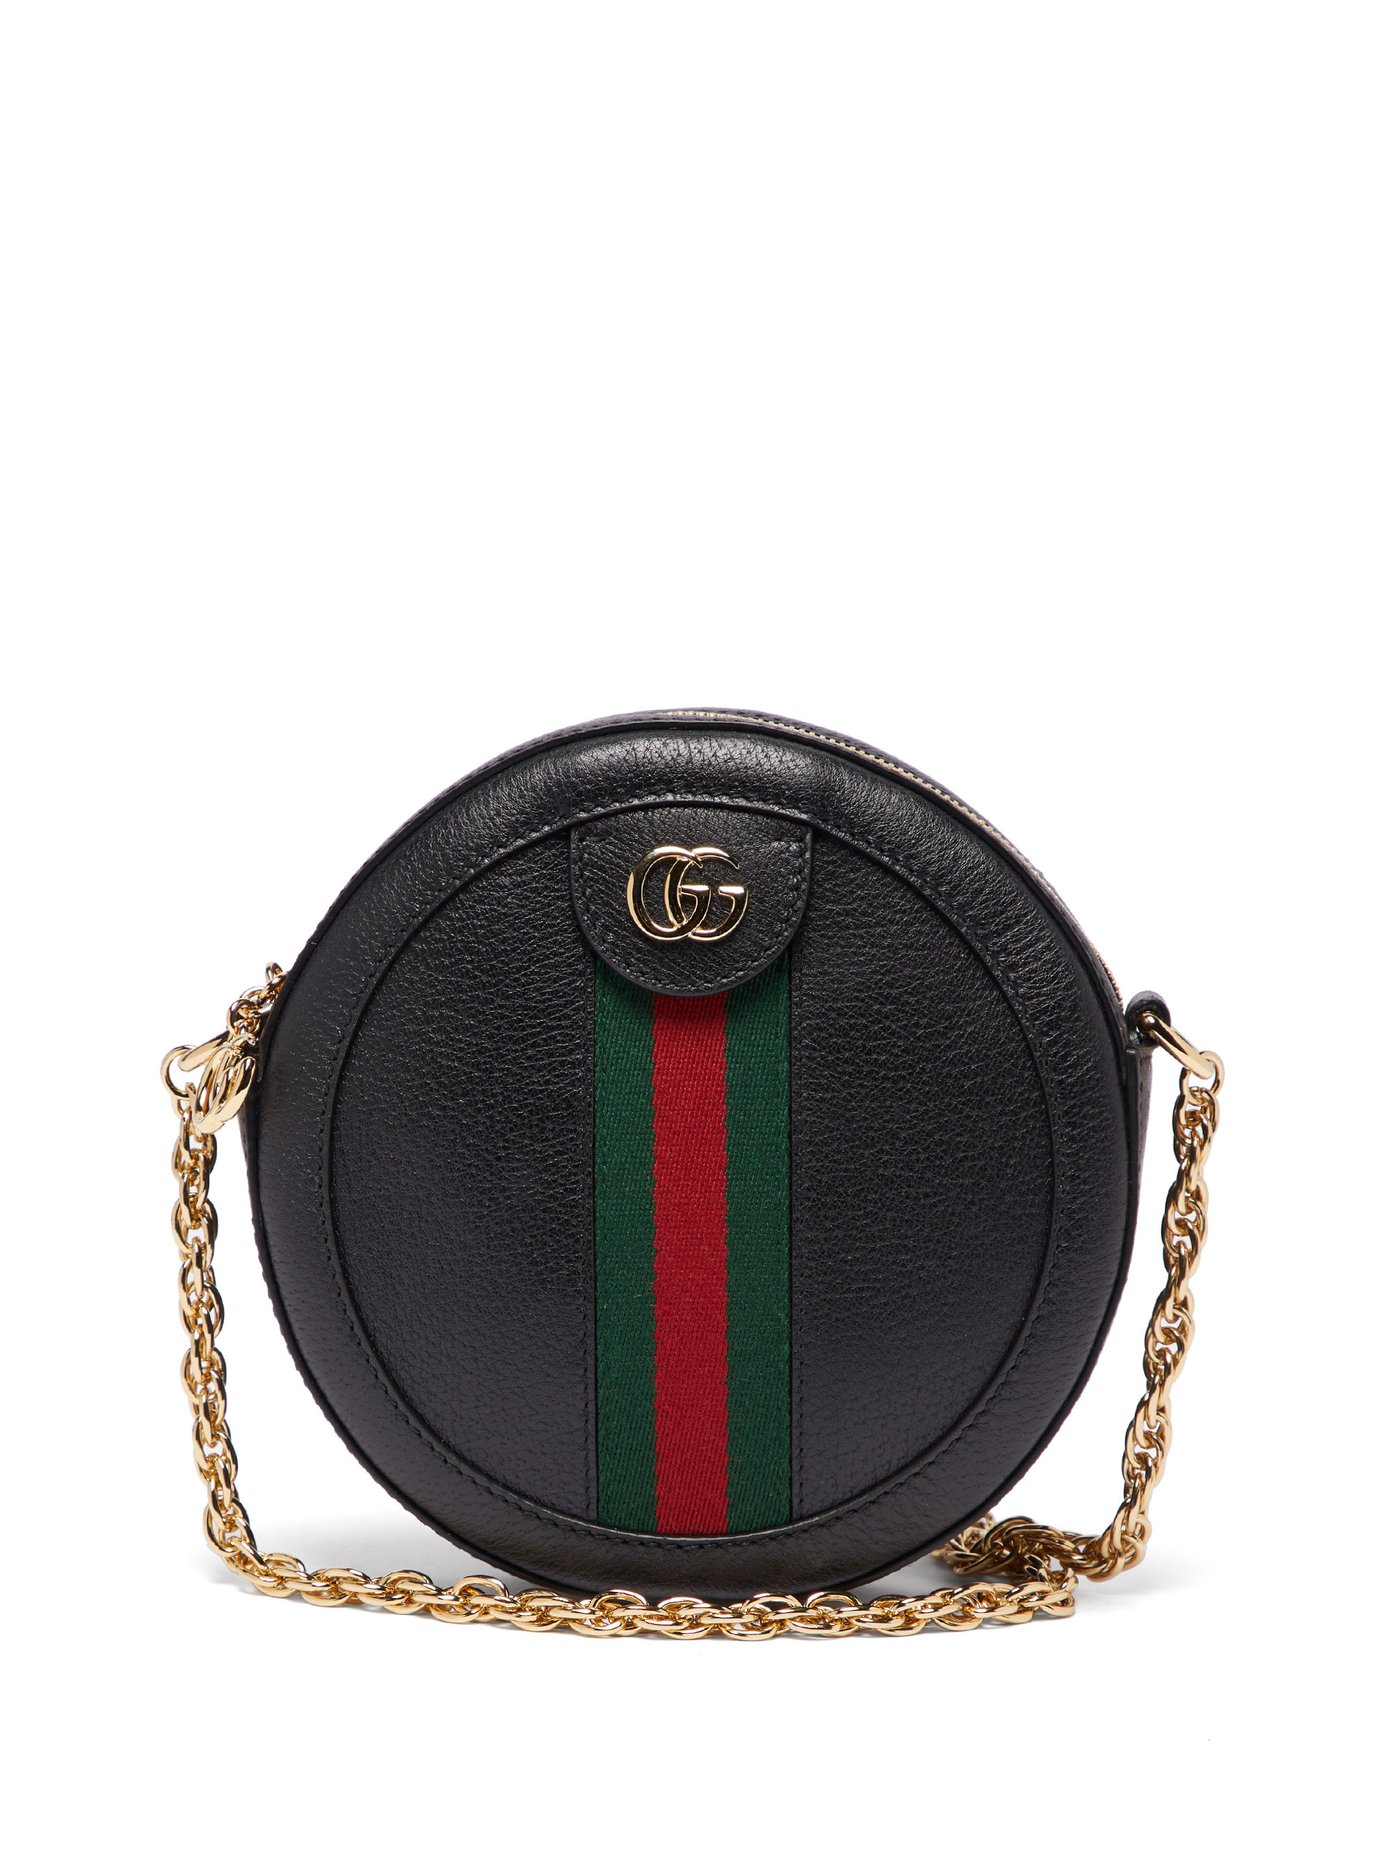 gucci ophidia leather